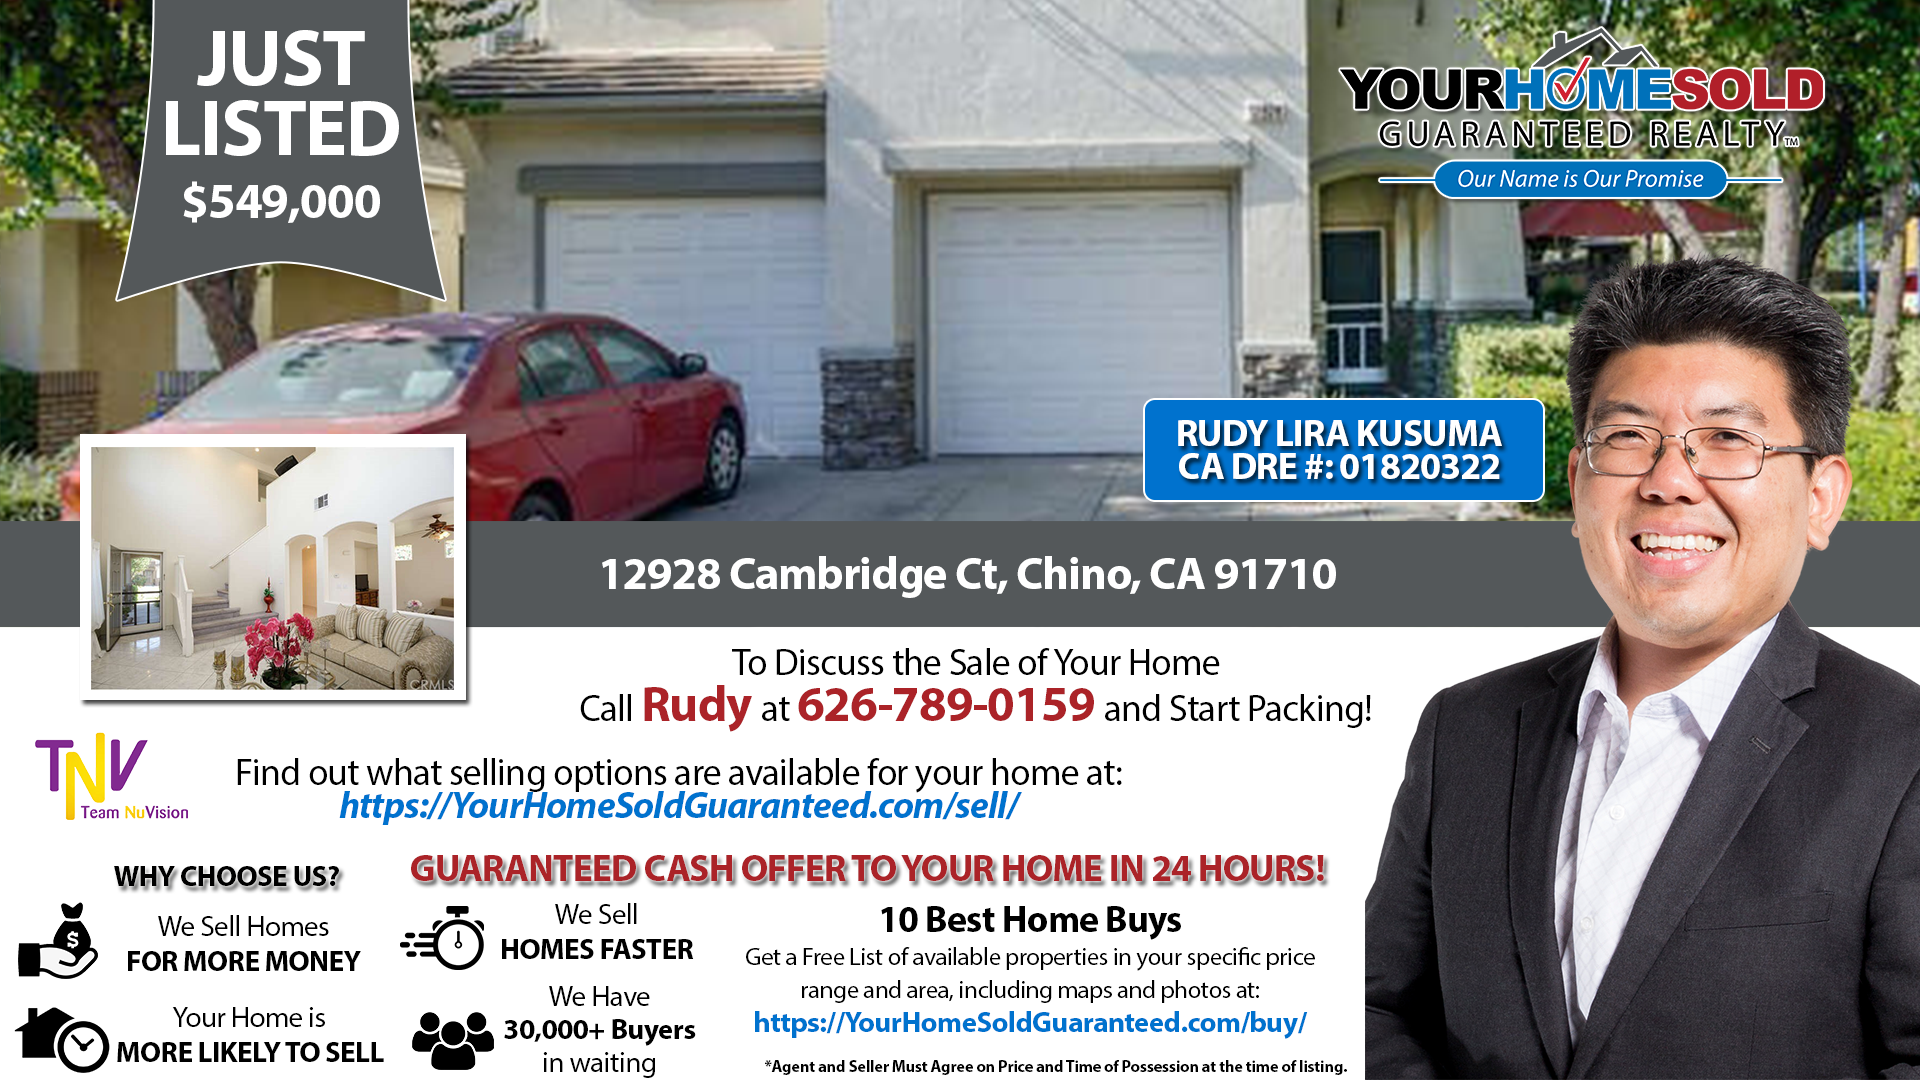 Buy or Trade - Welcome to this awesome home in the City of Chino